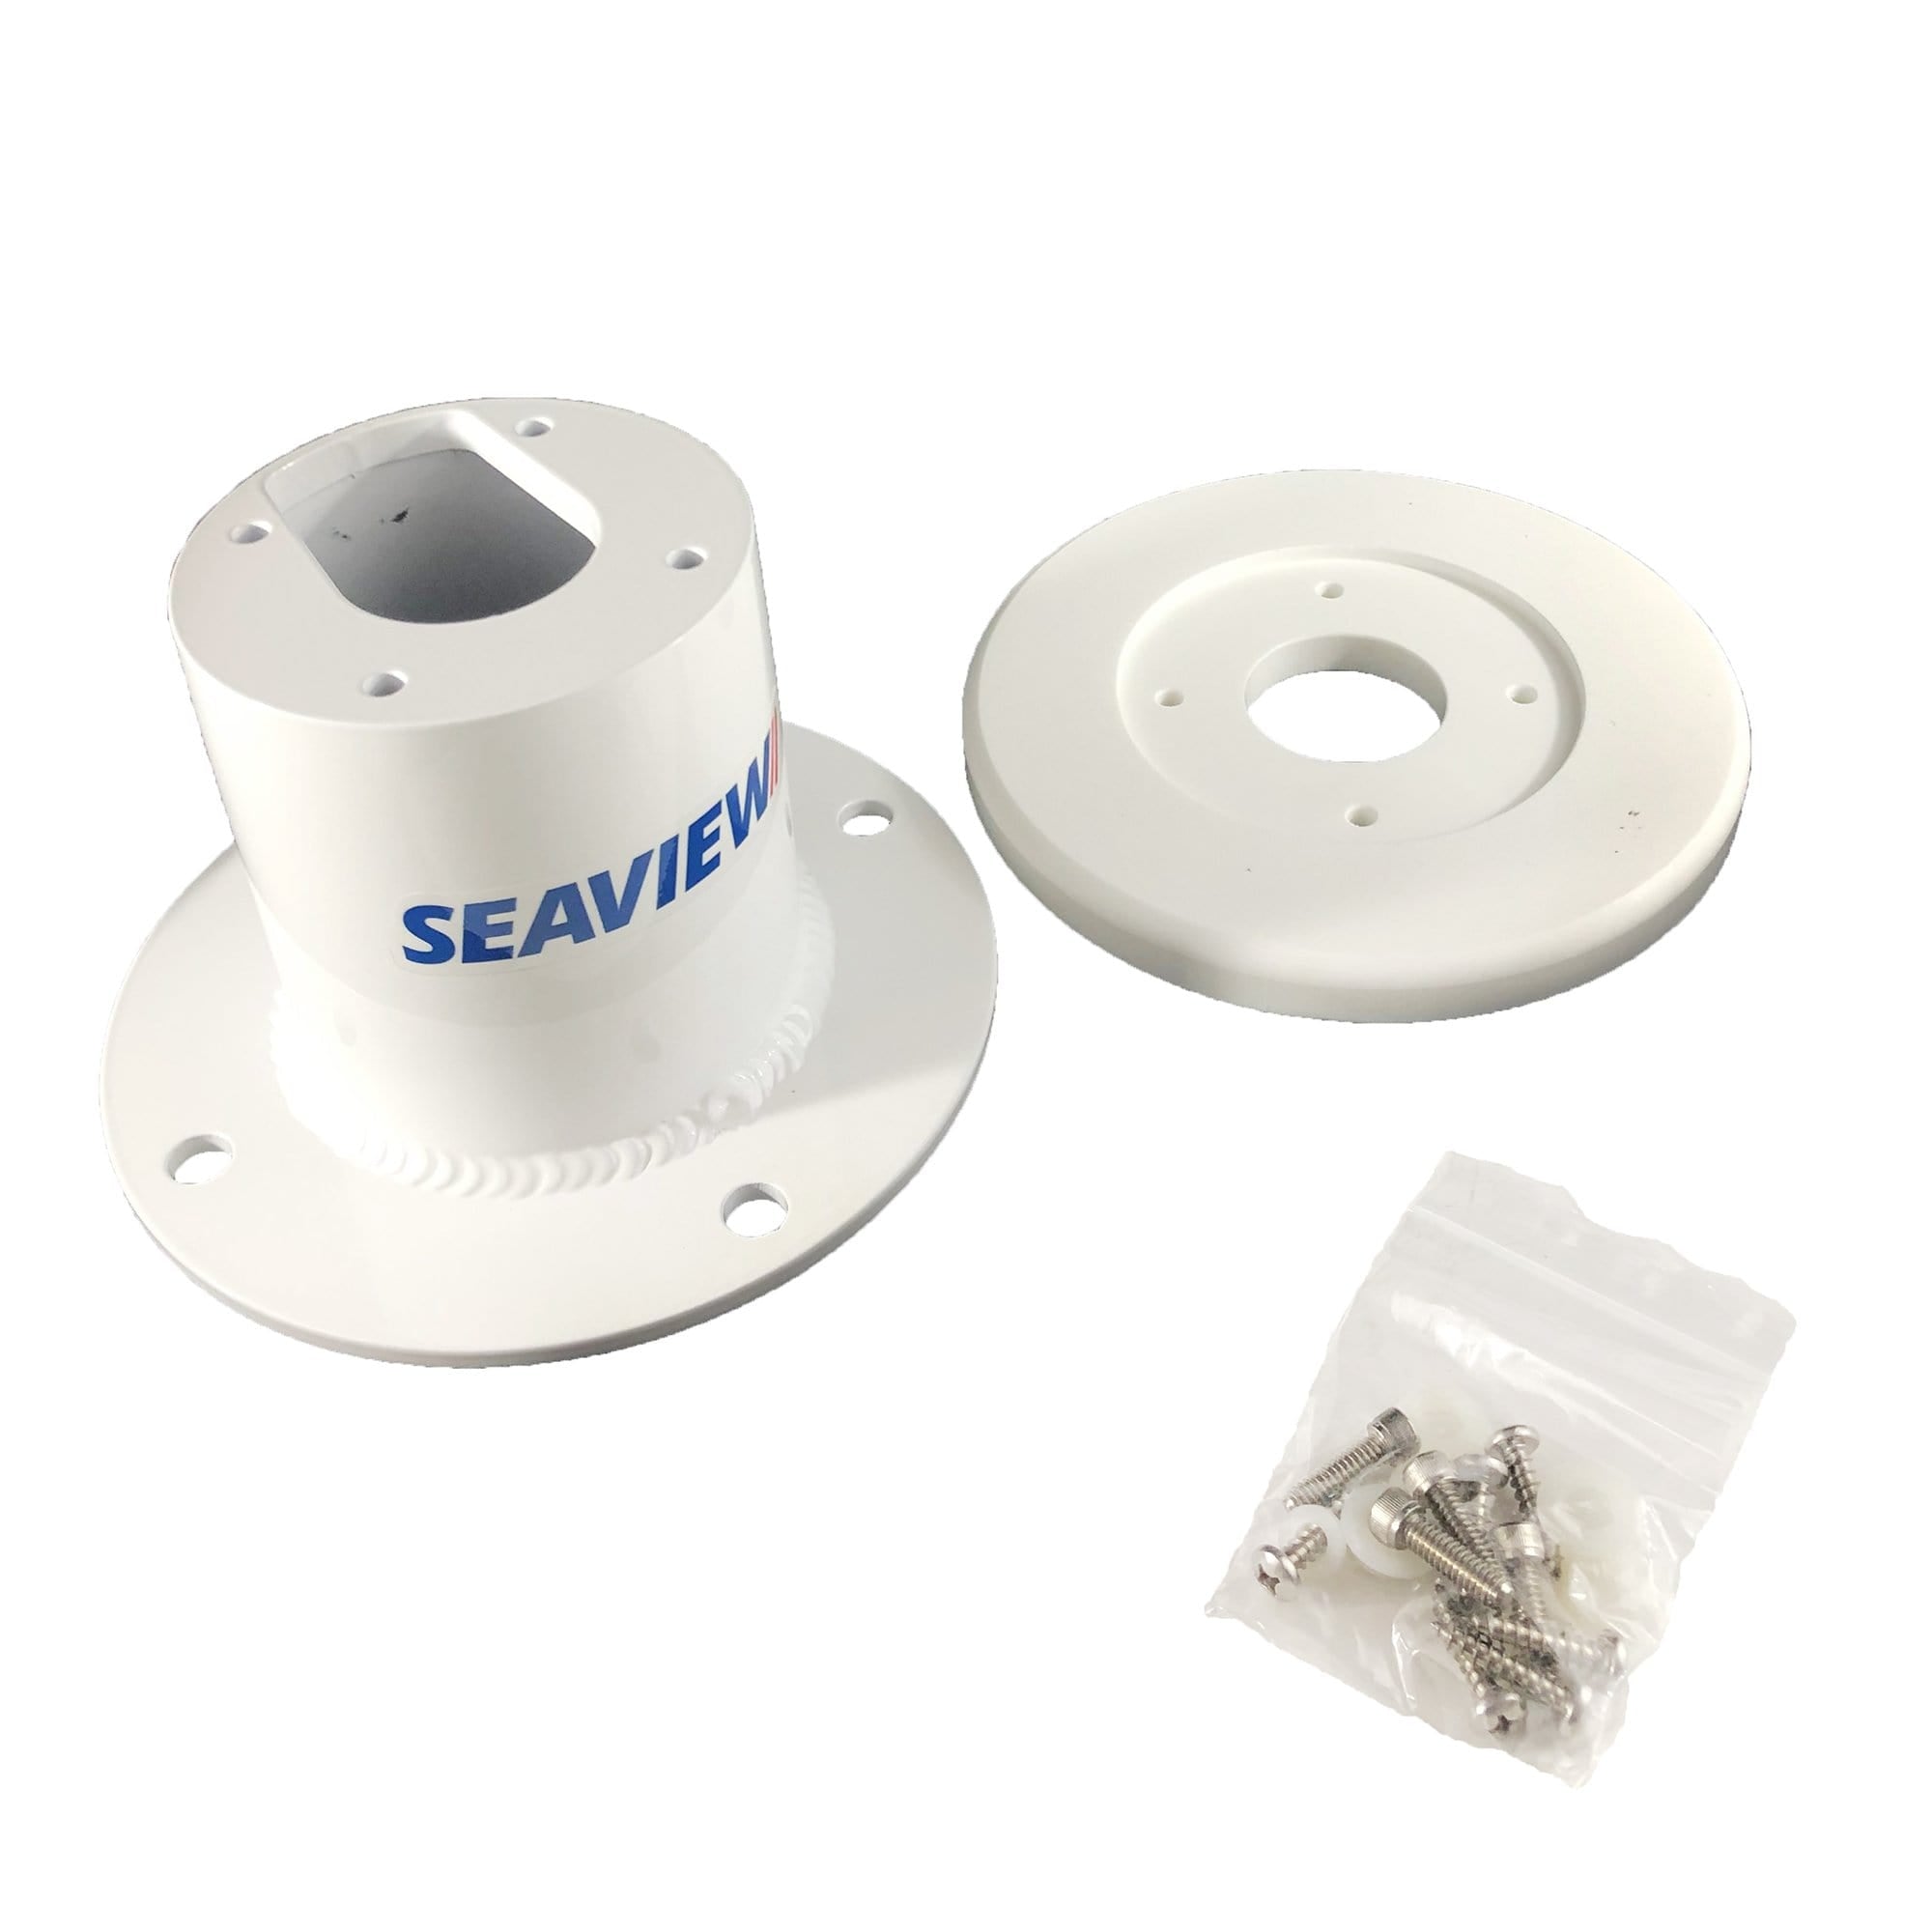 Seaview PM5FMH8 5.75" Thermal Vertical Camera Mount (Flir M100/M200 Series) 8 In. Round Base Plate